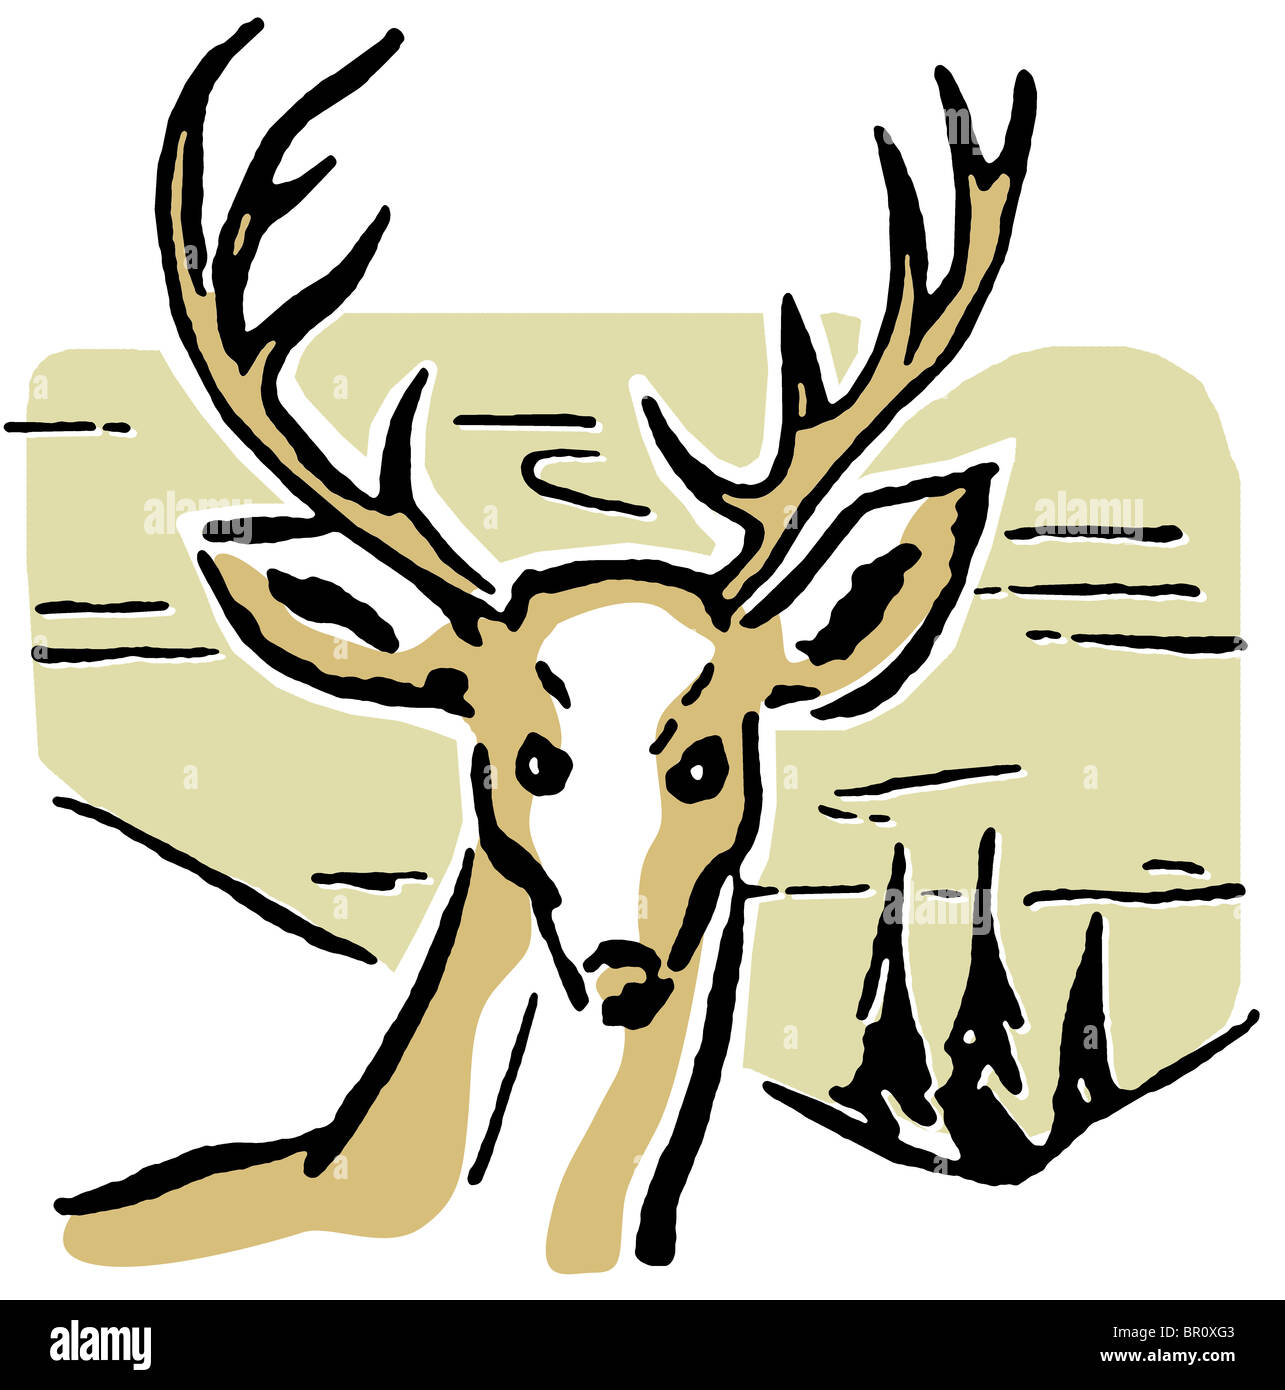 An illustration of a deer with pine trees and rolling hills in the background Stock Photo